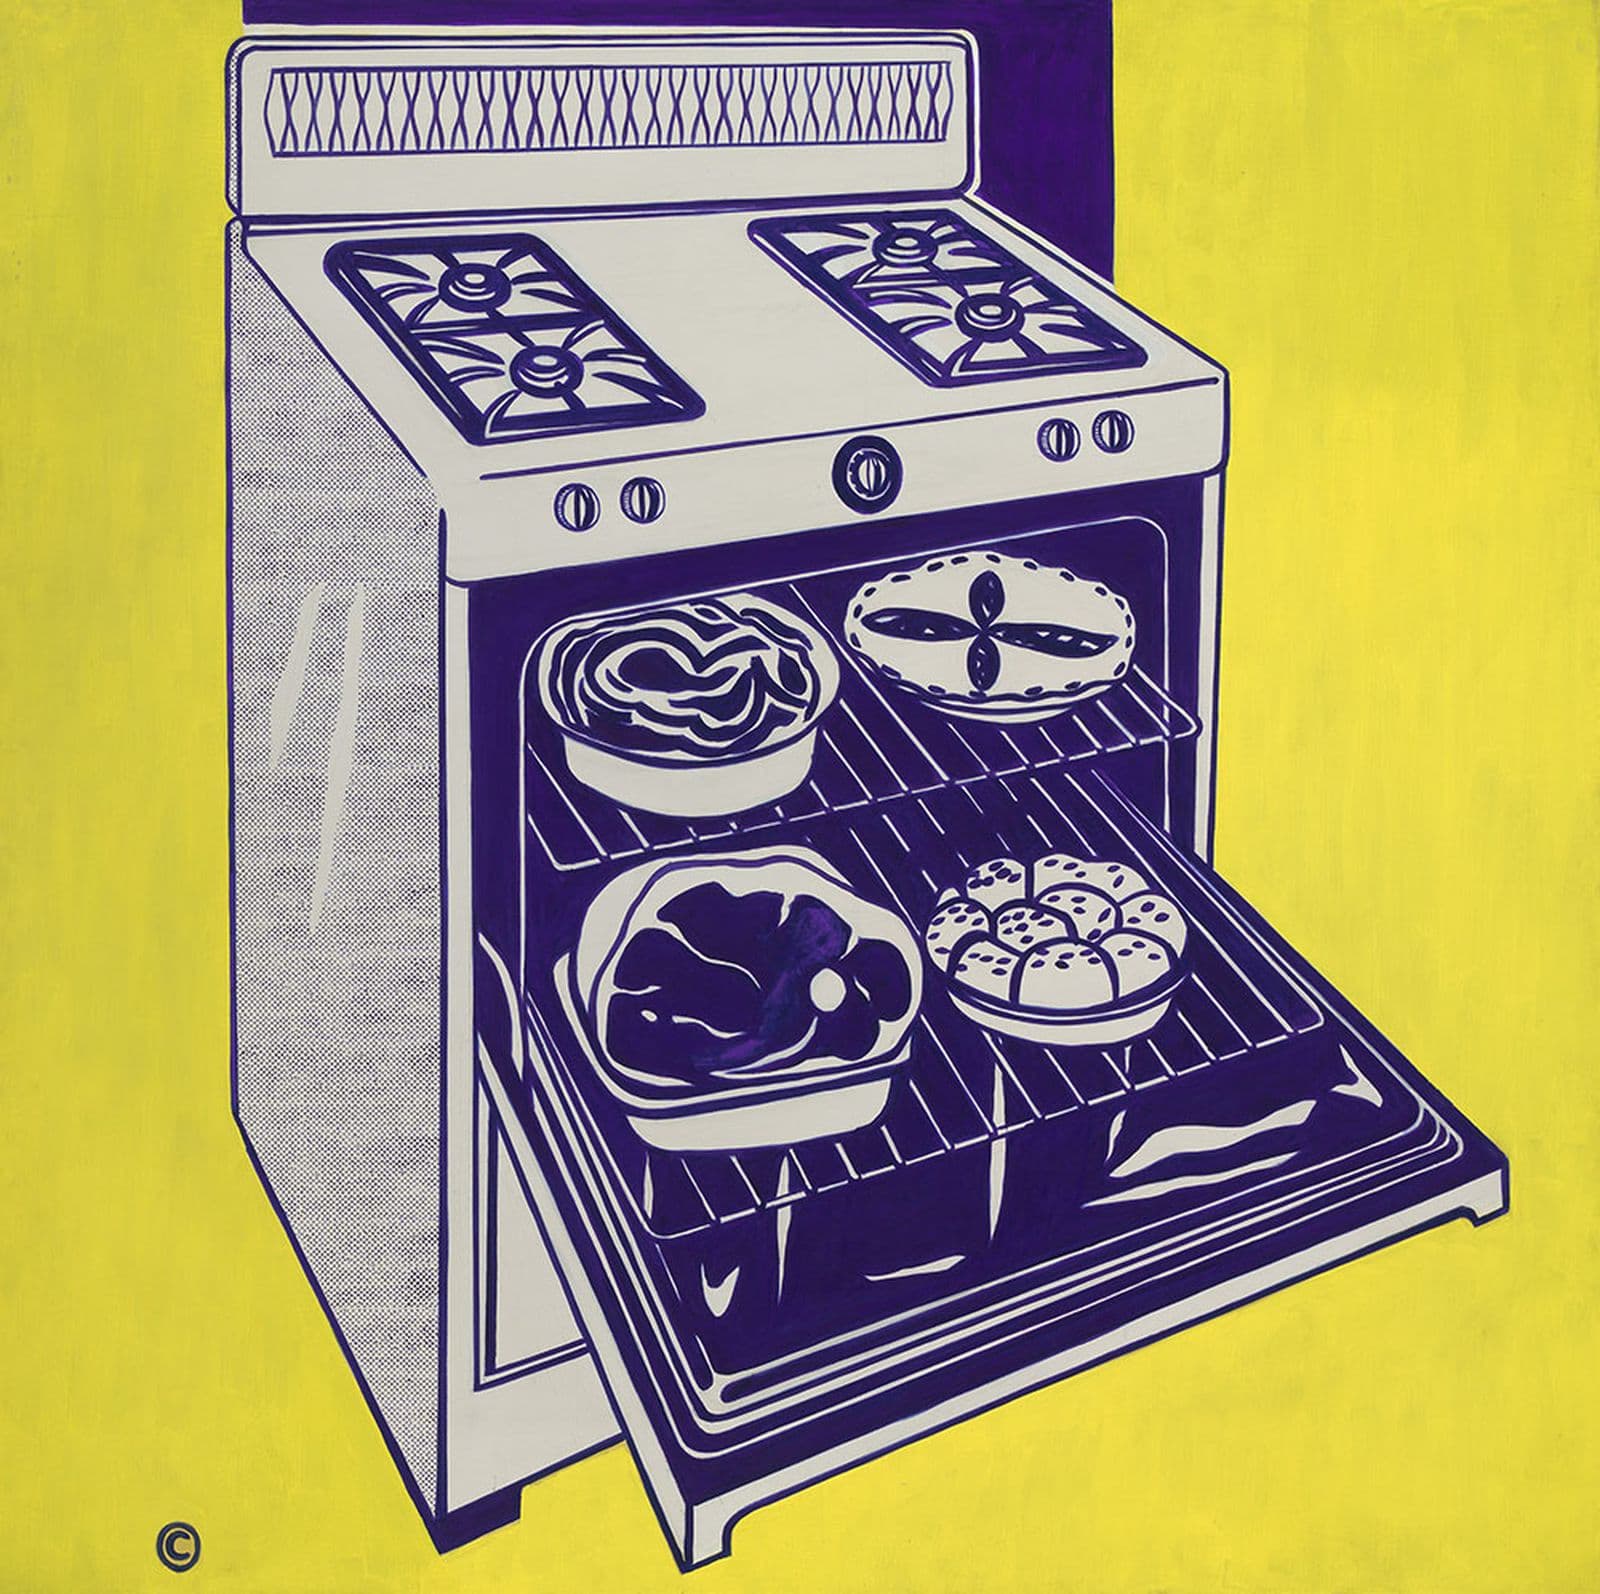 A yellow and blue pop art image of an oven